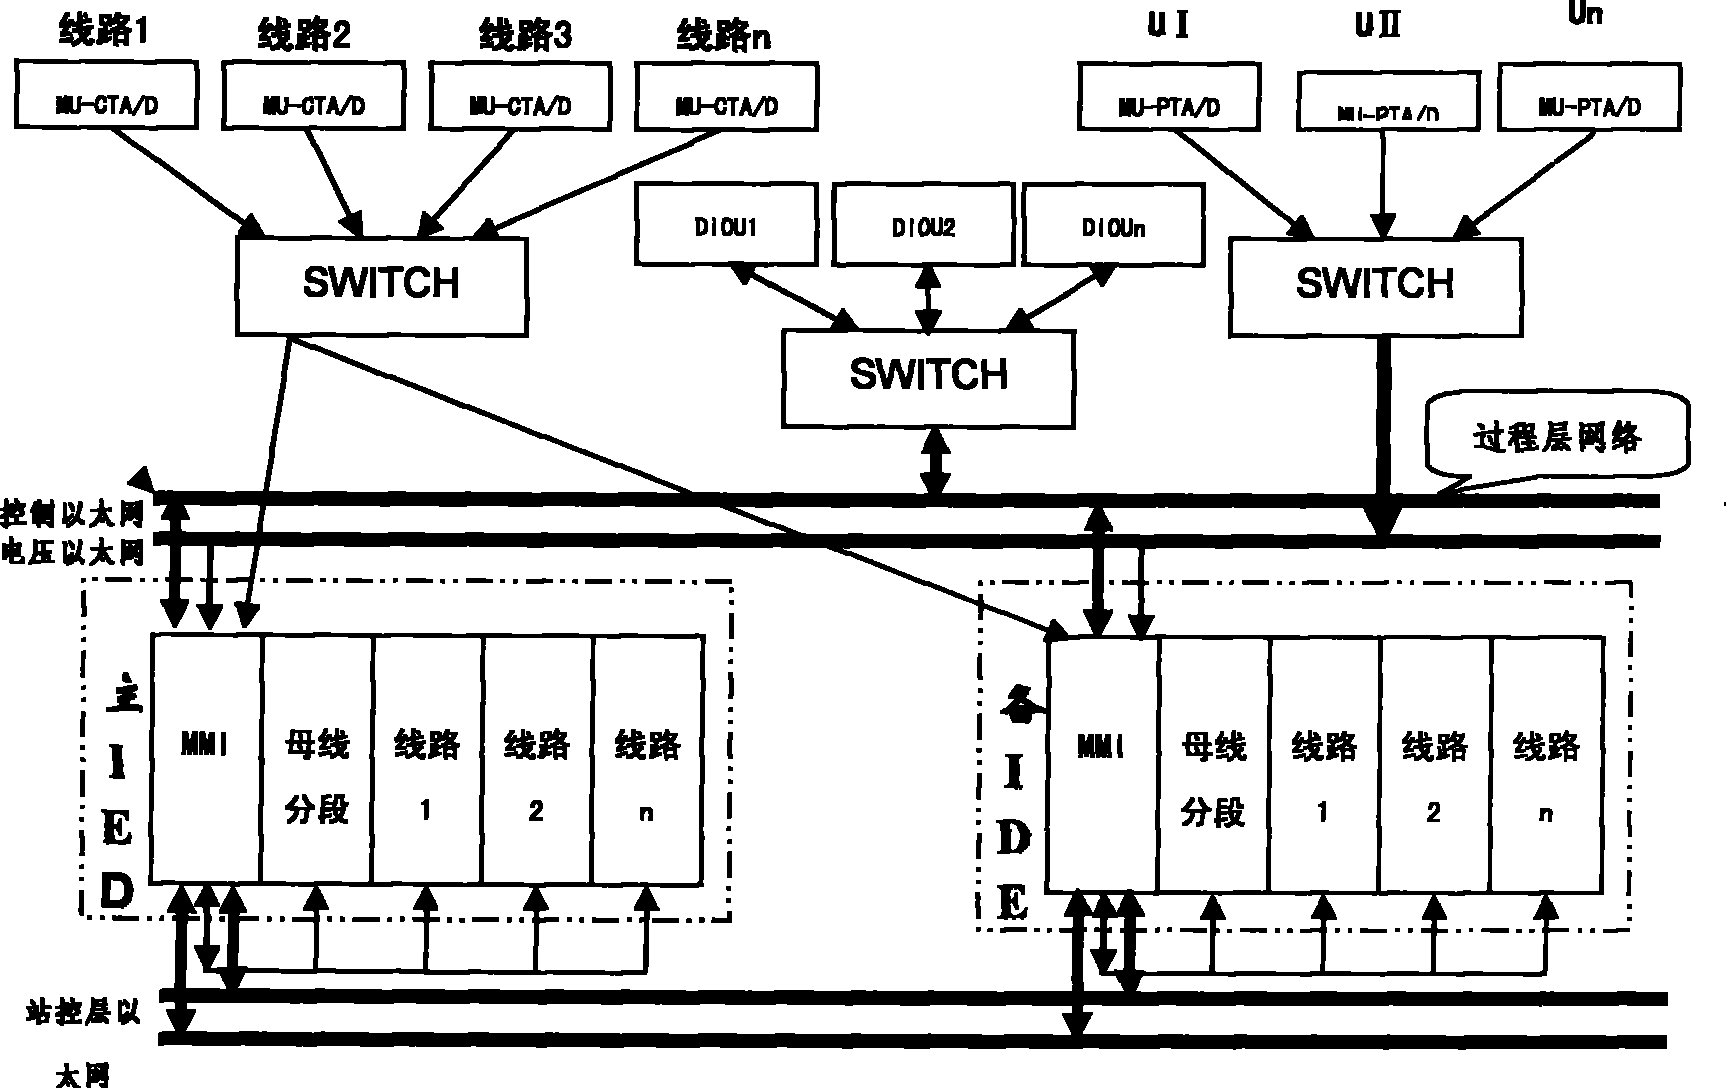 Digital synthesis protection observe and control unit of multipath operation mode